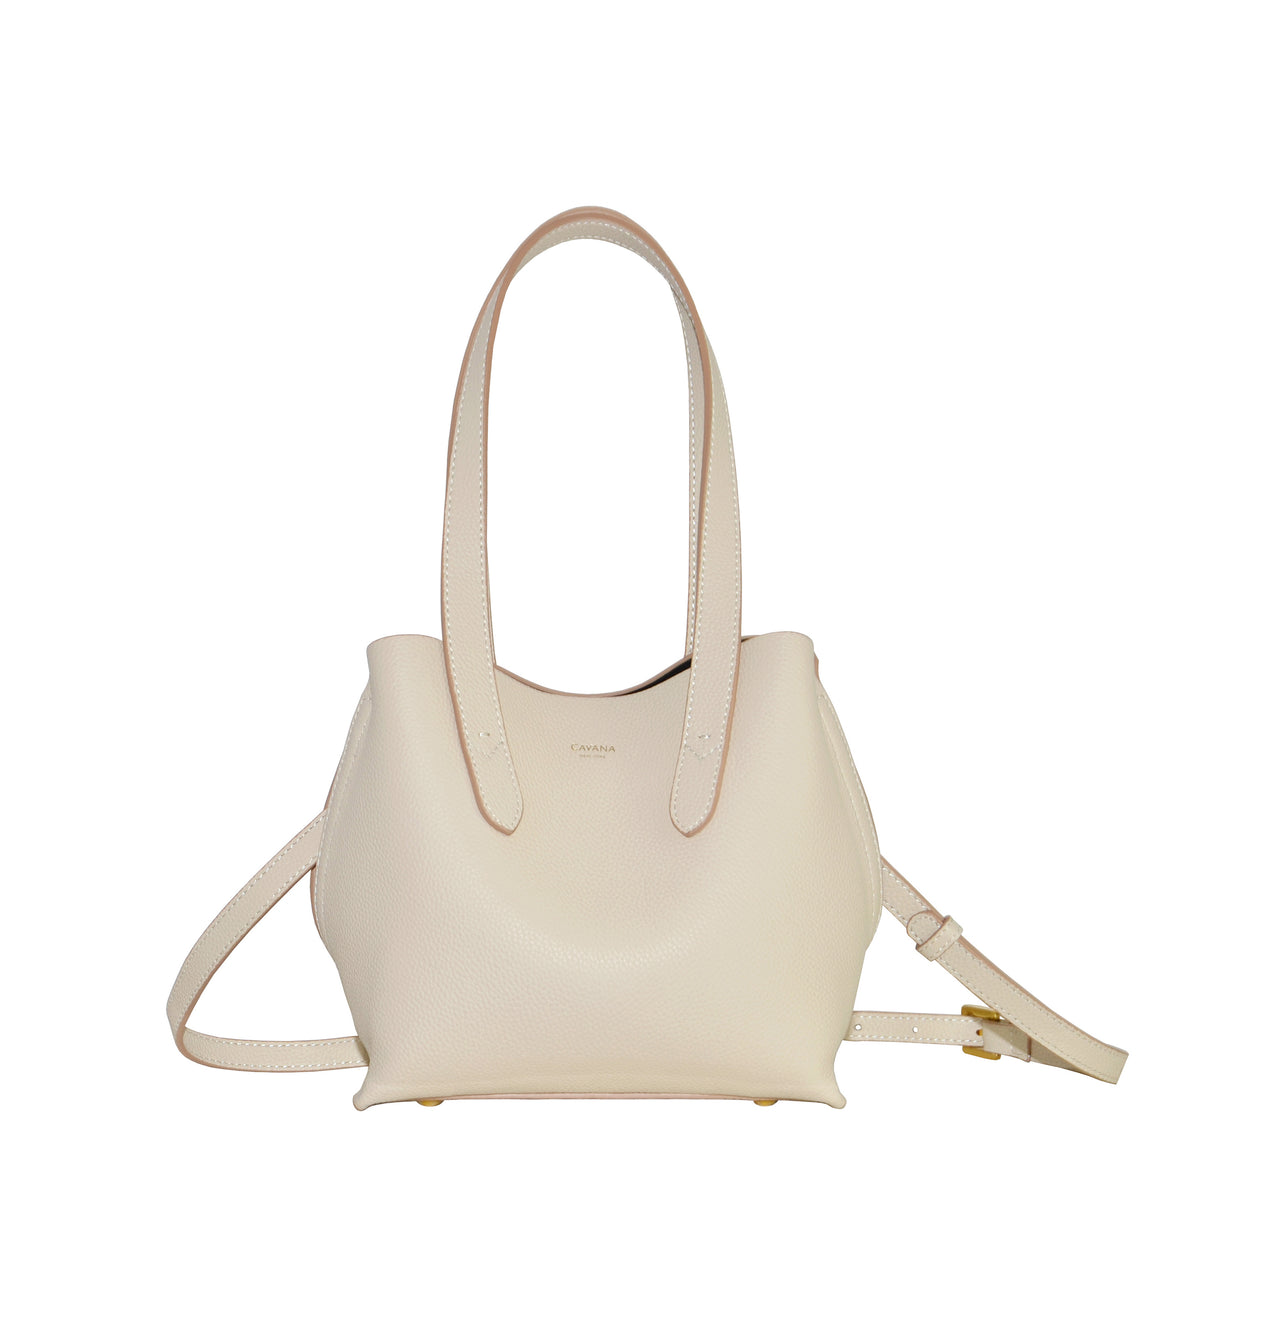 ARCO BAG IN OFF-WHITE